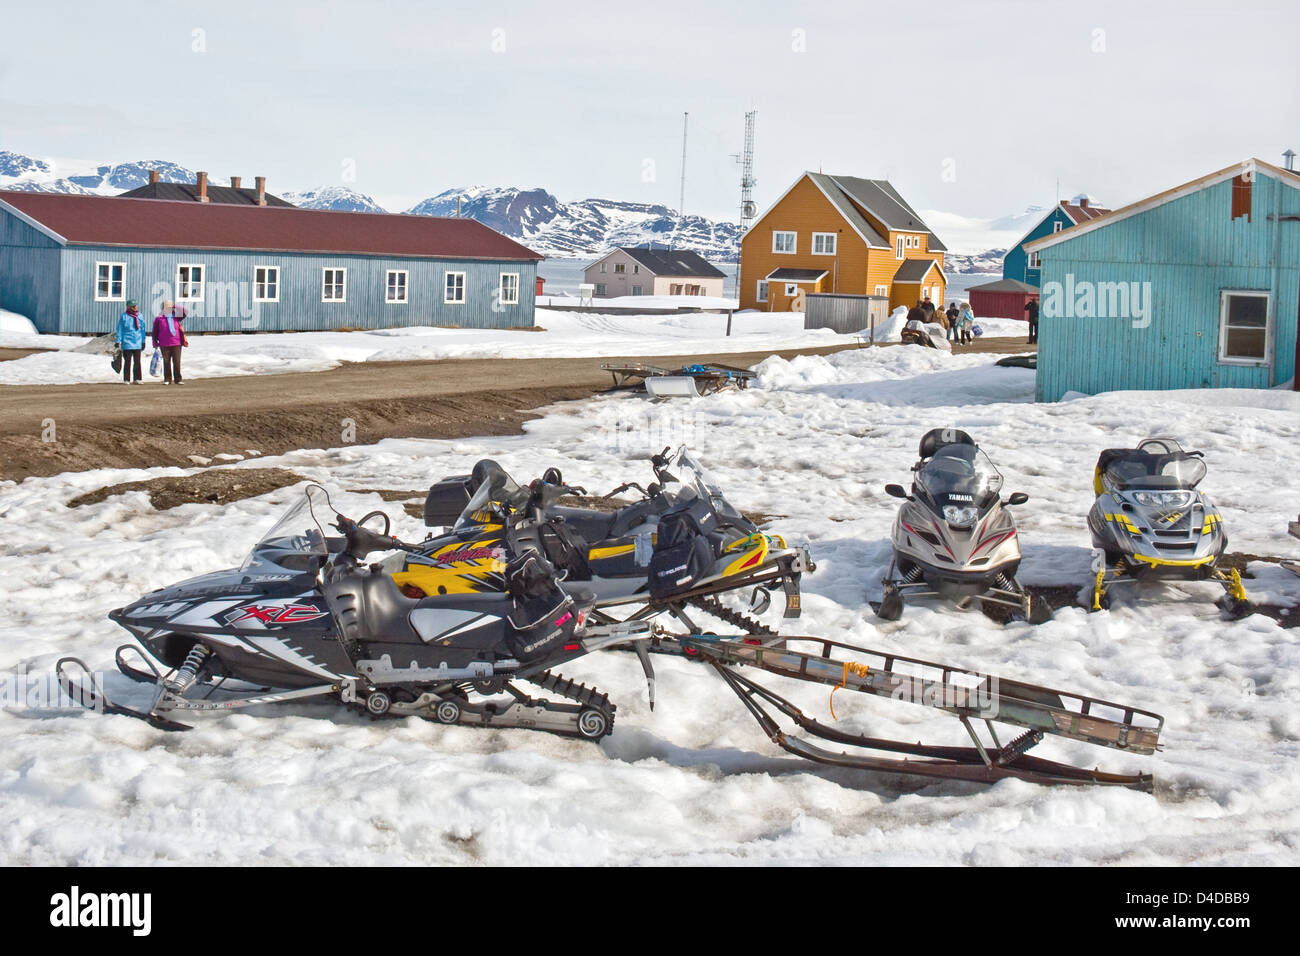 Snowmobiles with a sled trailer parked at the research station of Ny Alesund on Spitzbergen in the high Arctic. Stock Photo